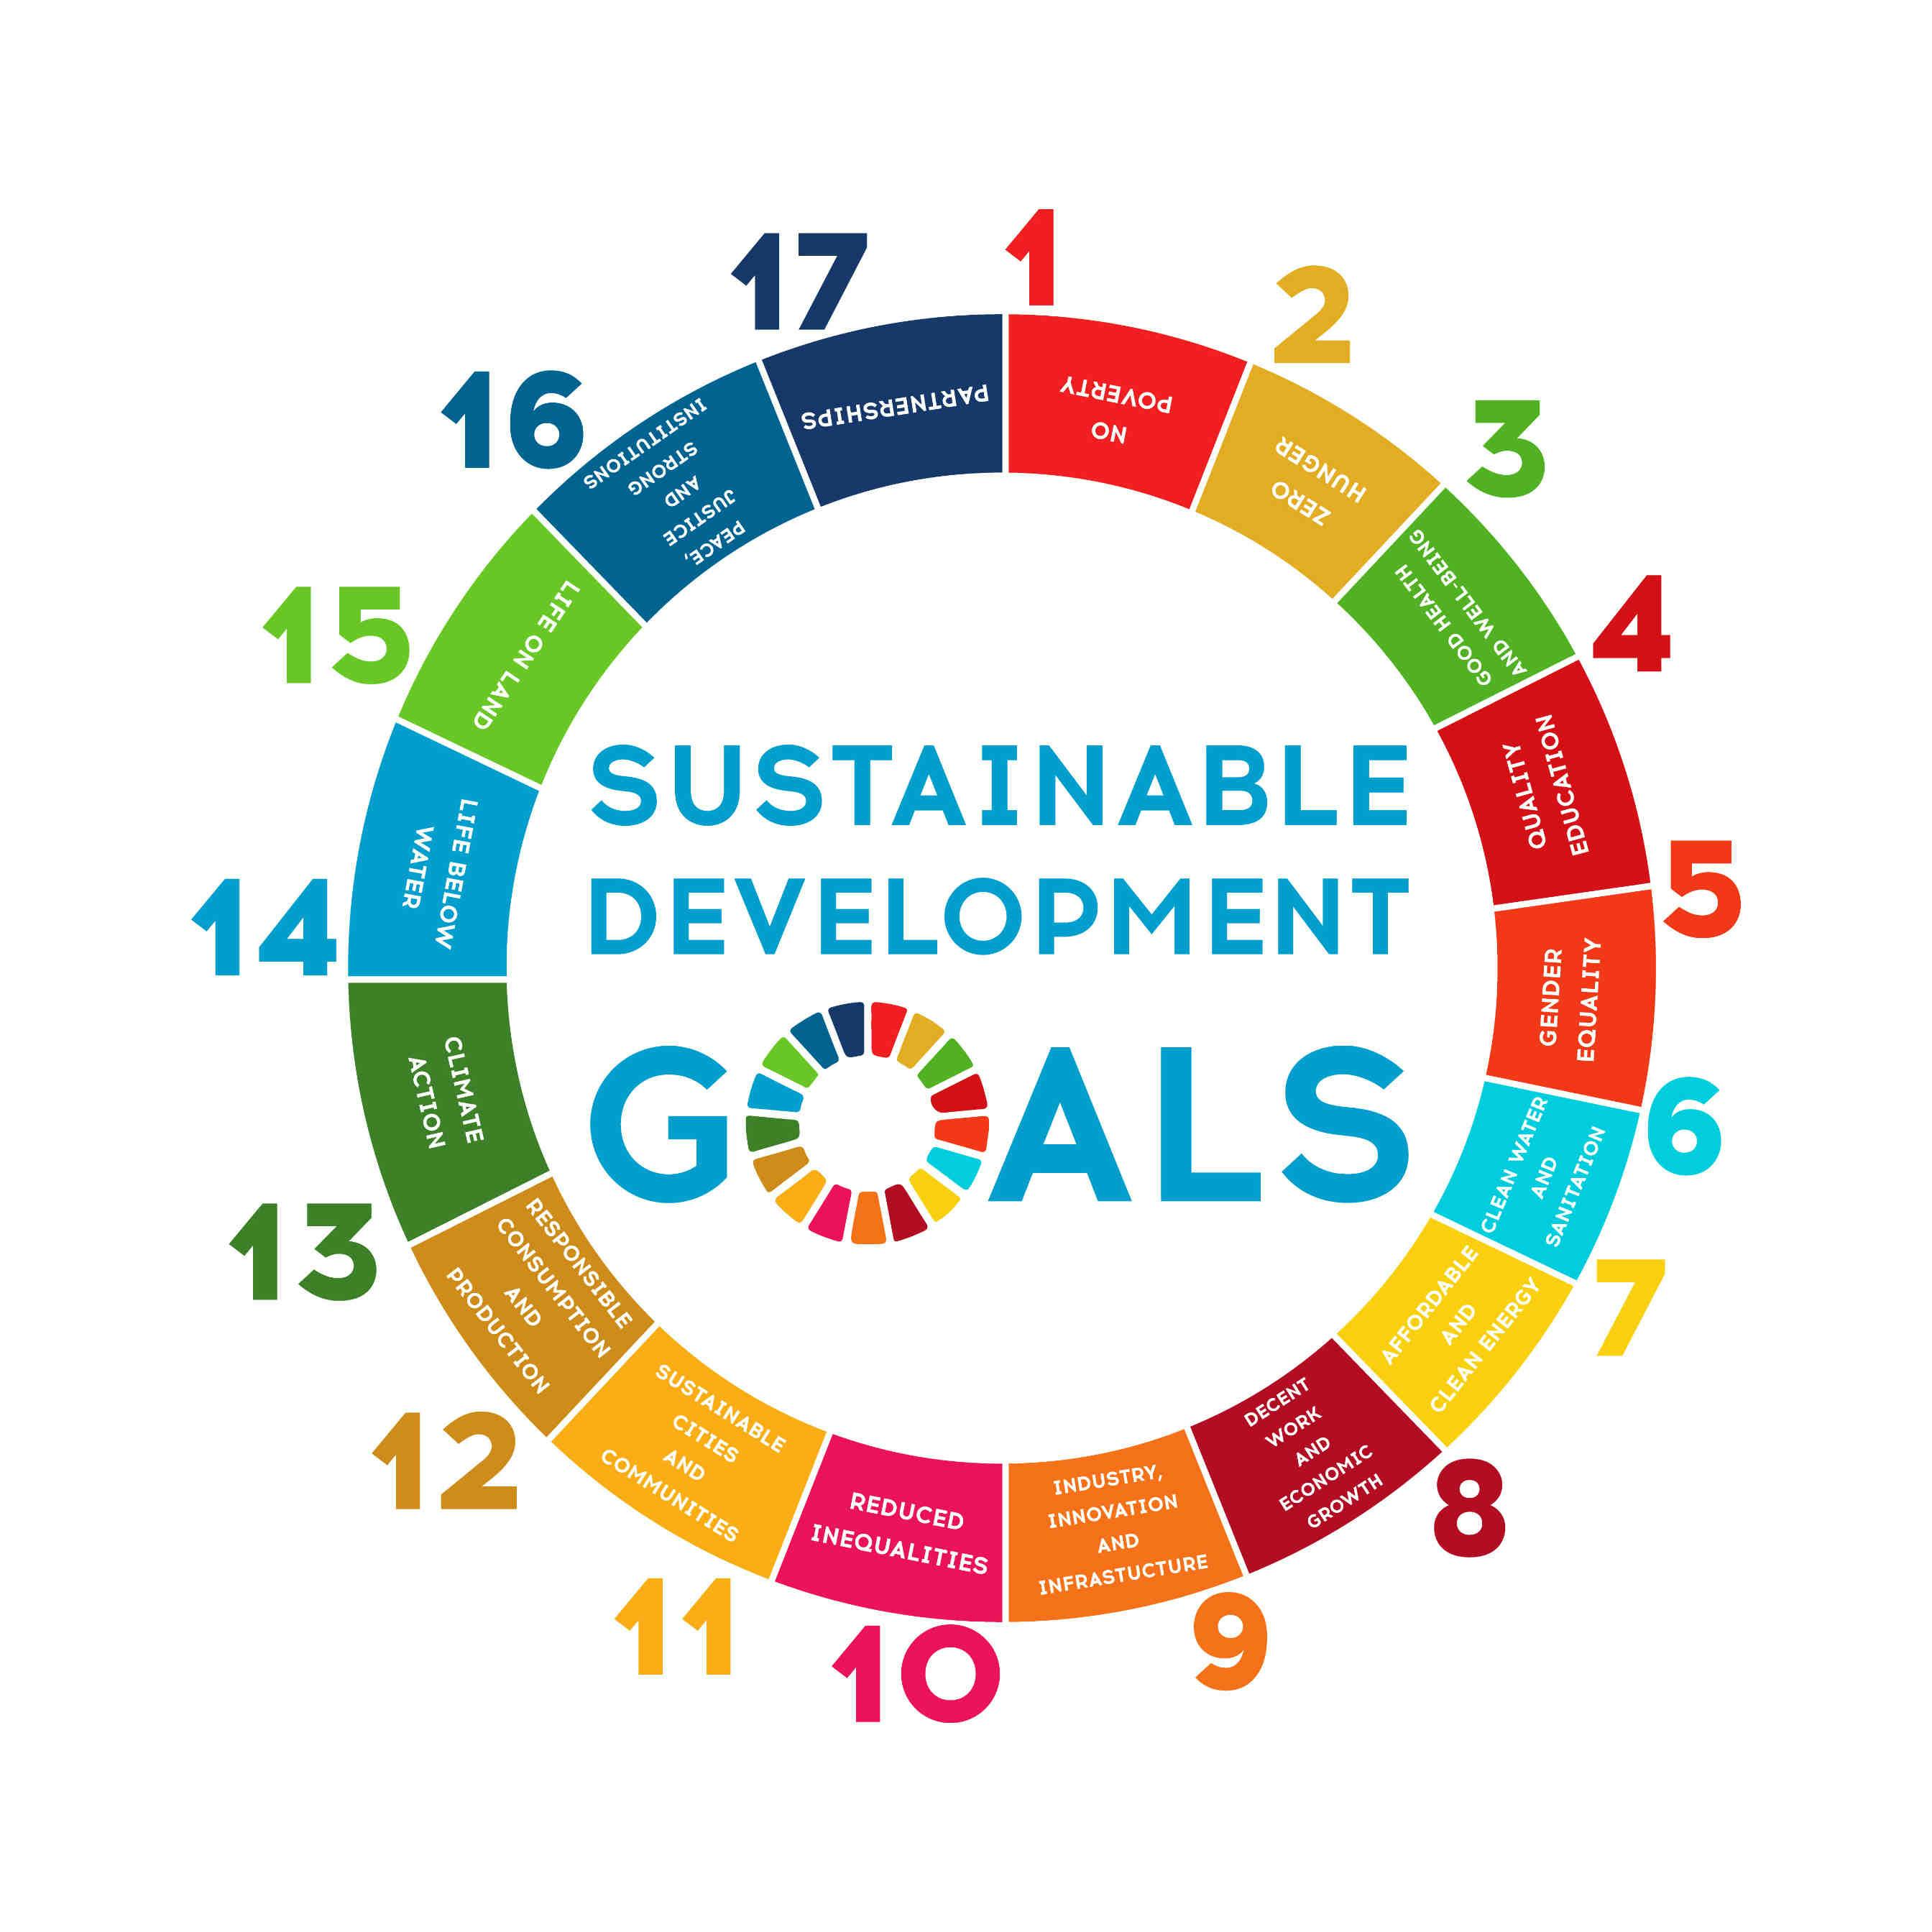 The current situation on Italy's 17 SDGs Goals